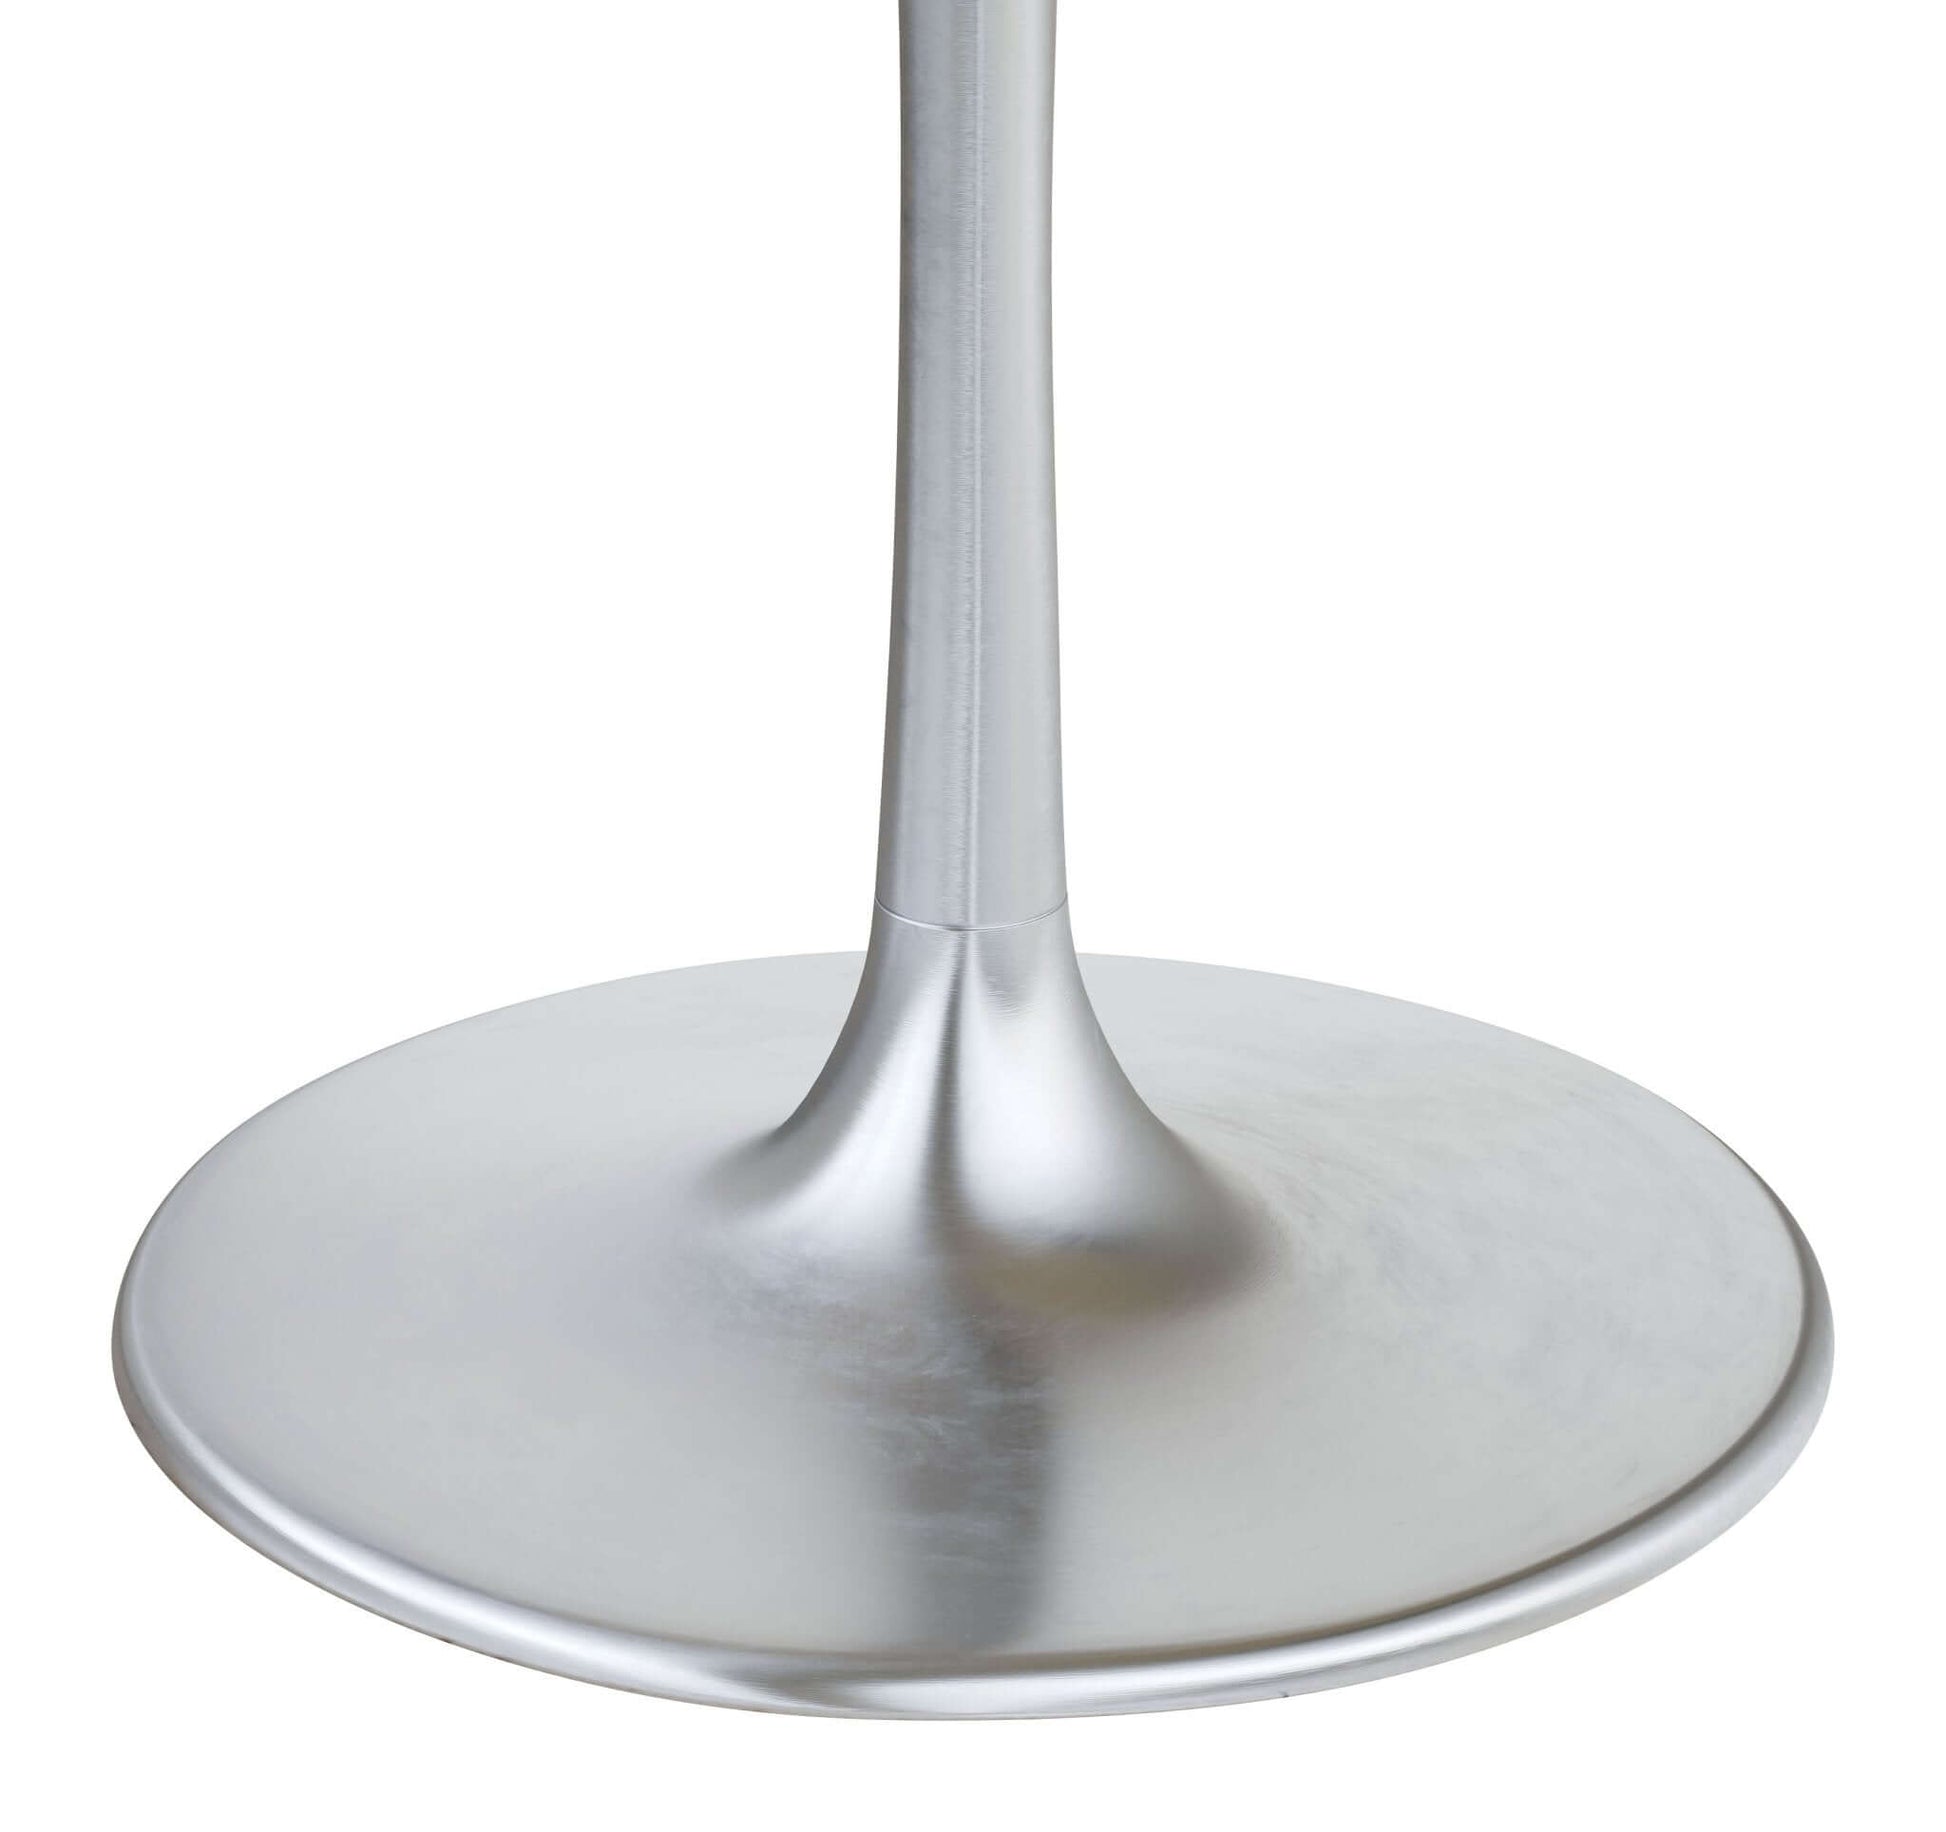 Metropolis Round Dining Table in Gray Top, Silver Base - Revel Sofa 